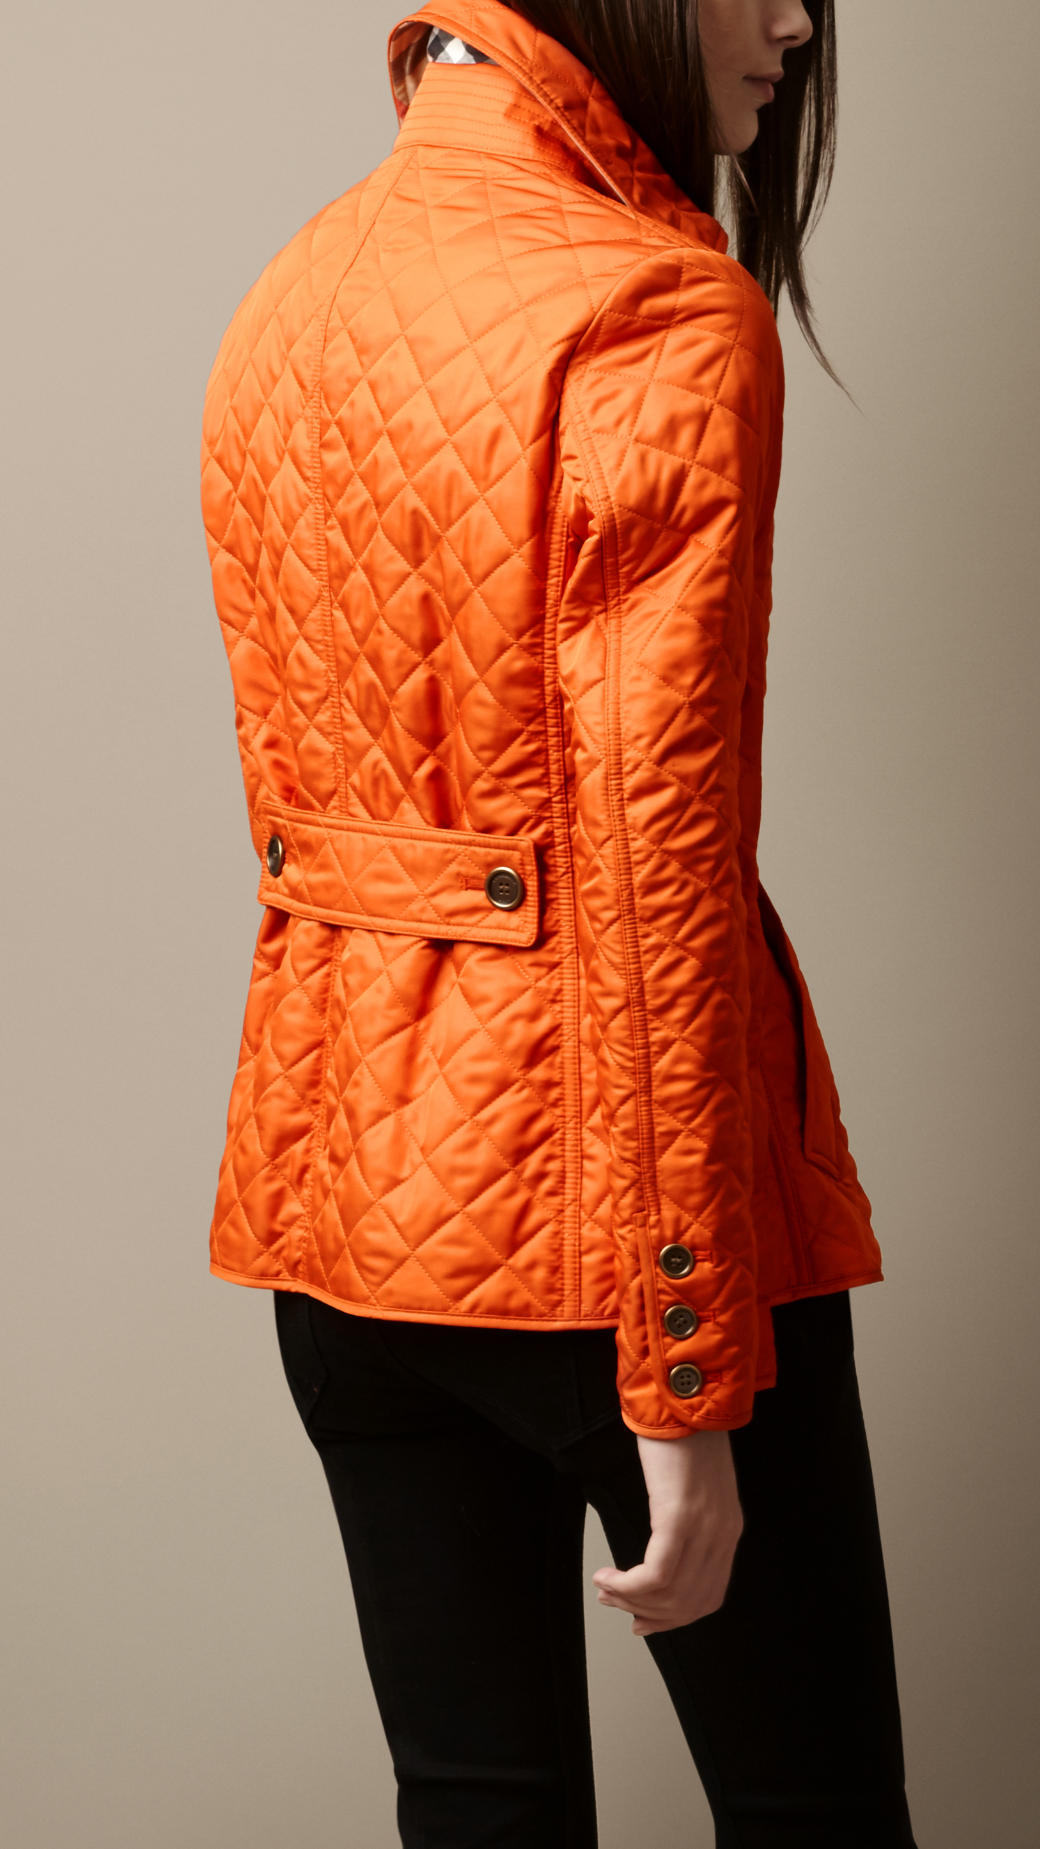 Lyst - Burberry Diamond Quilted Jacket in Orange